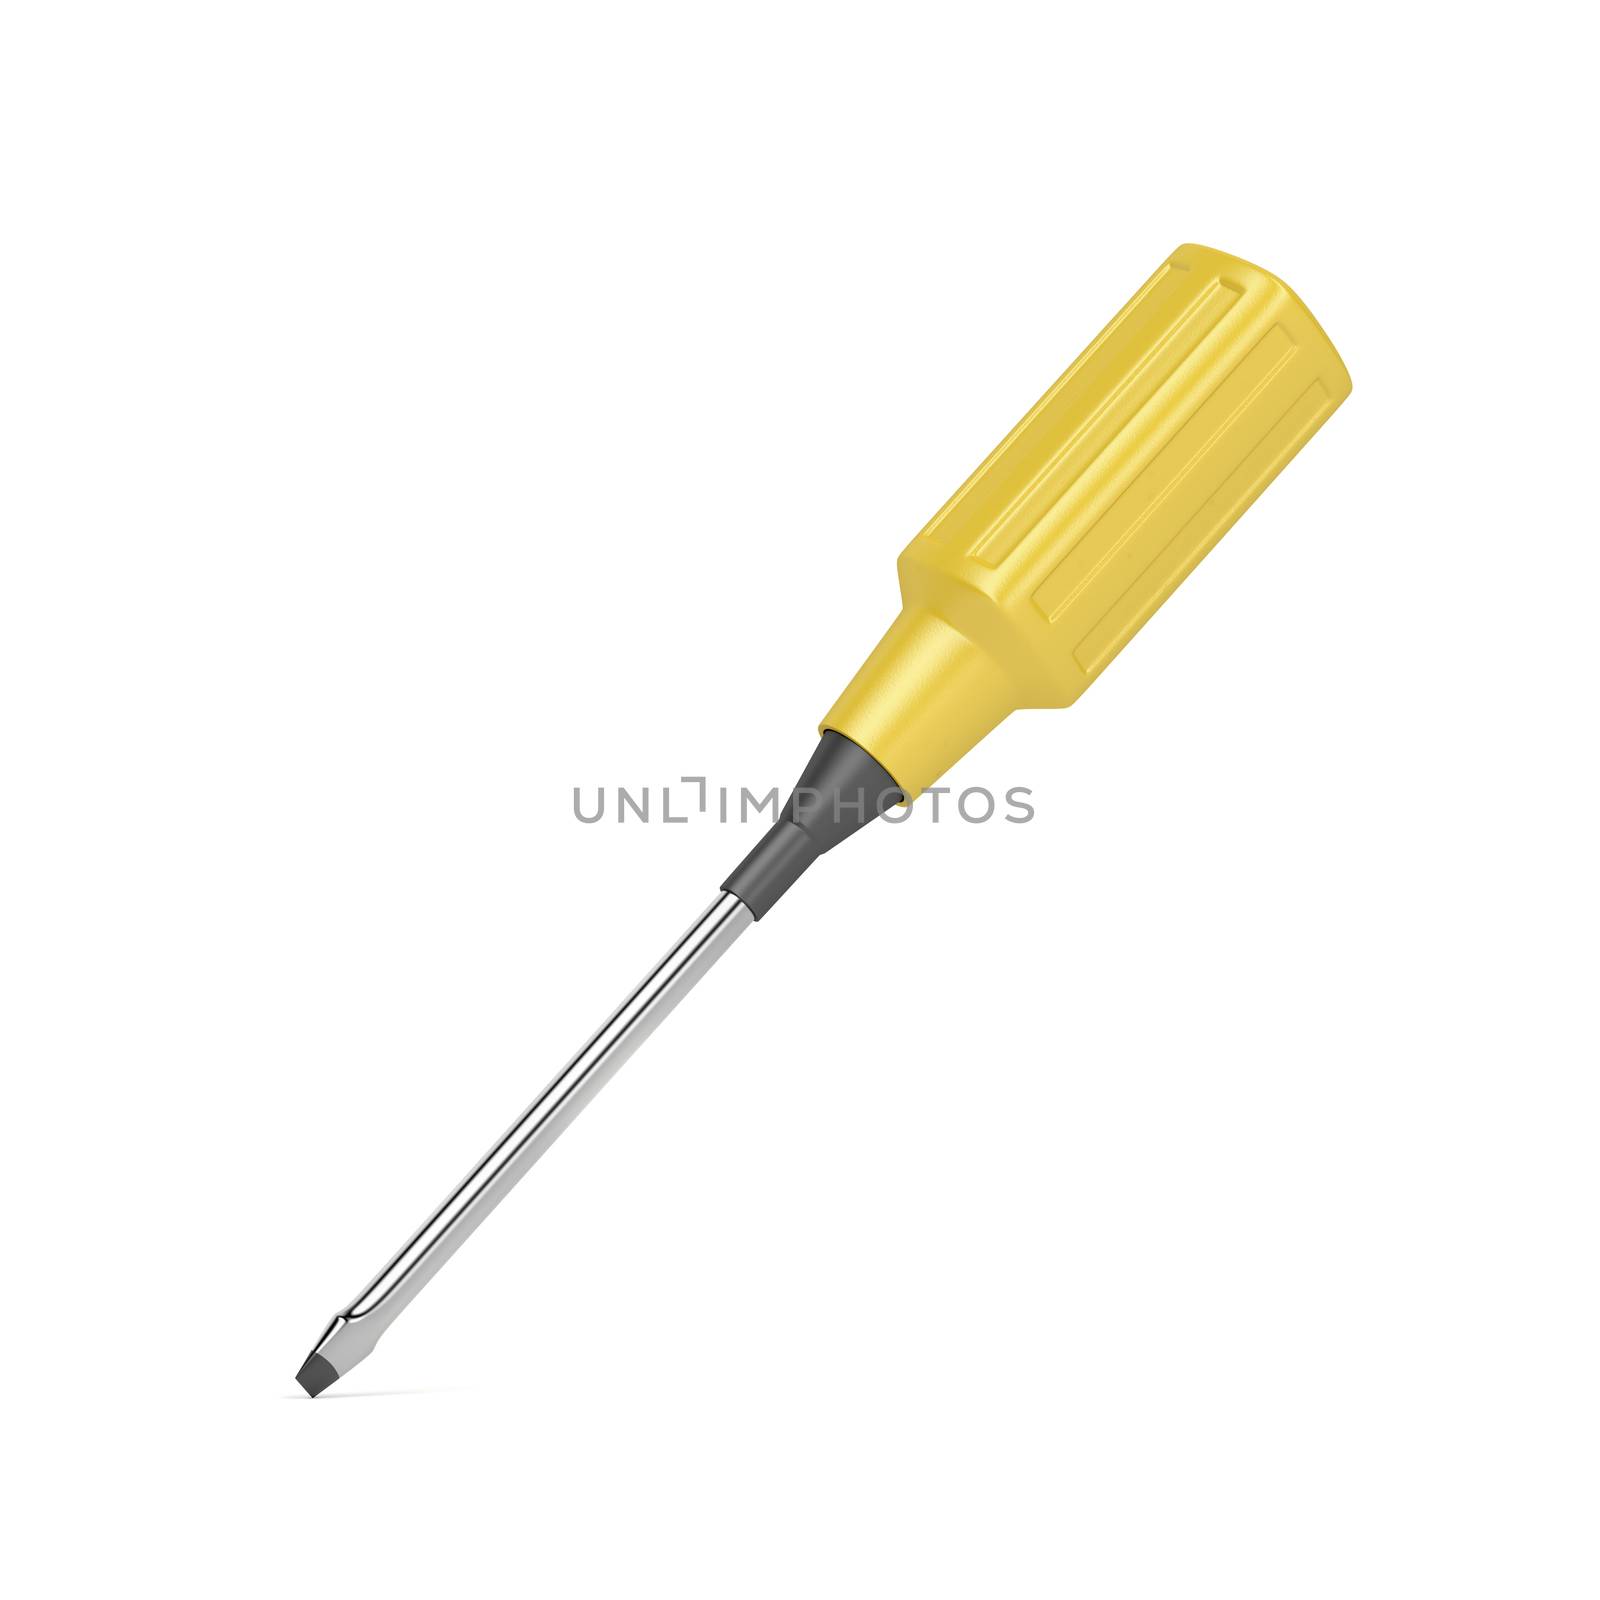 Screwdriver on white by magraphics